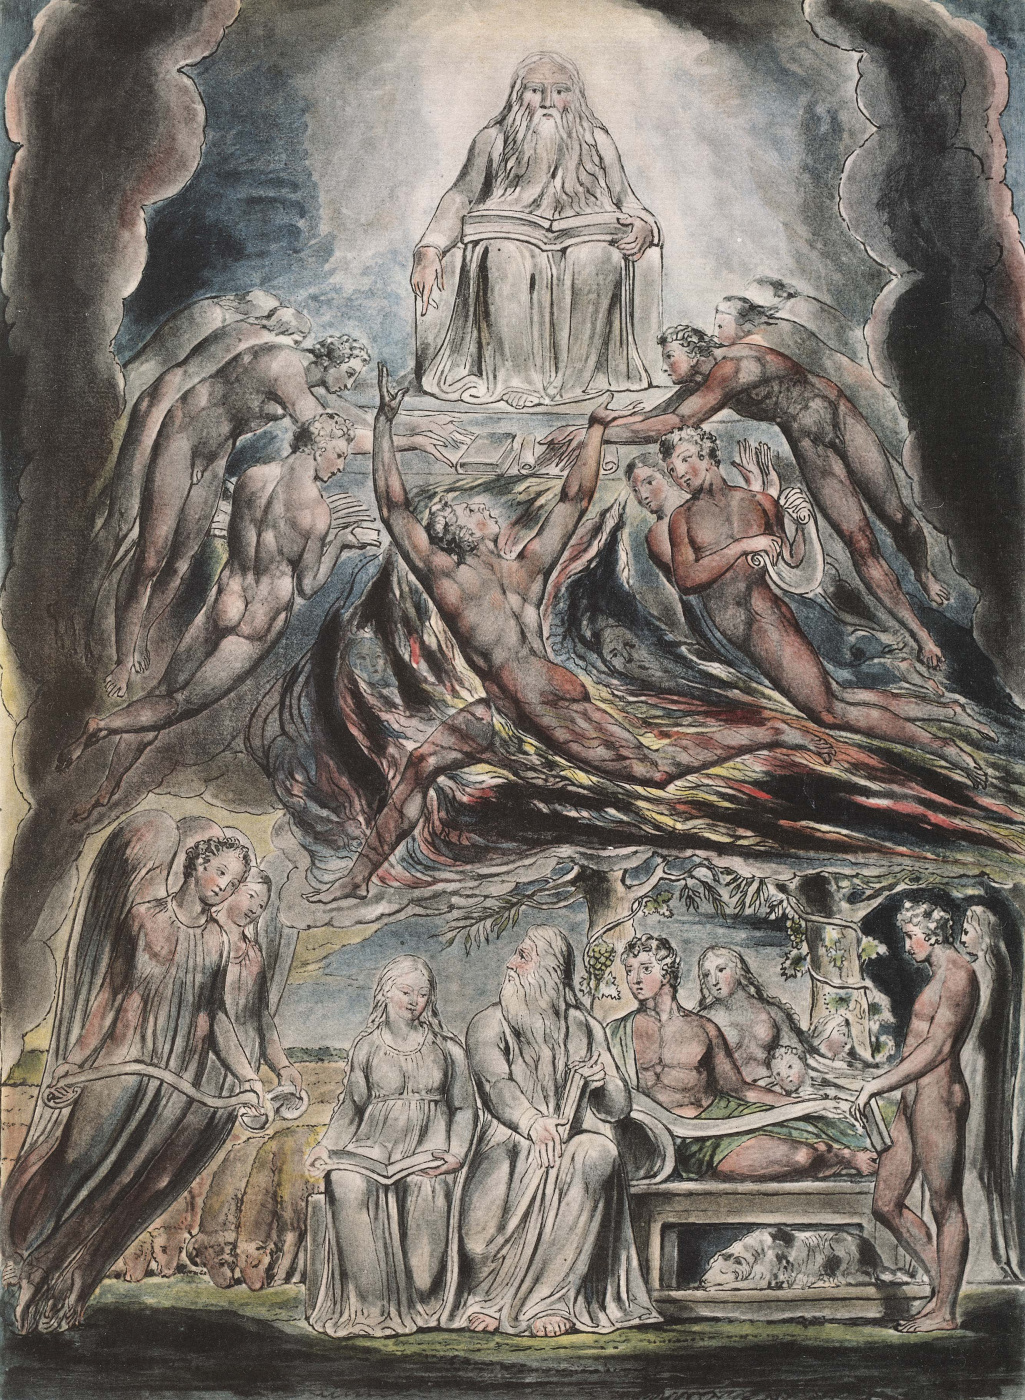 Buy Digital Version The Book Of Job Satan Before The Throne Of God By William Blake Arthive